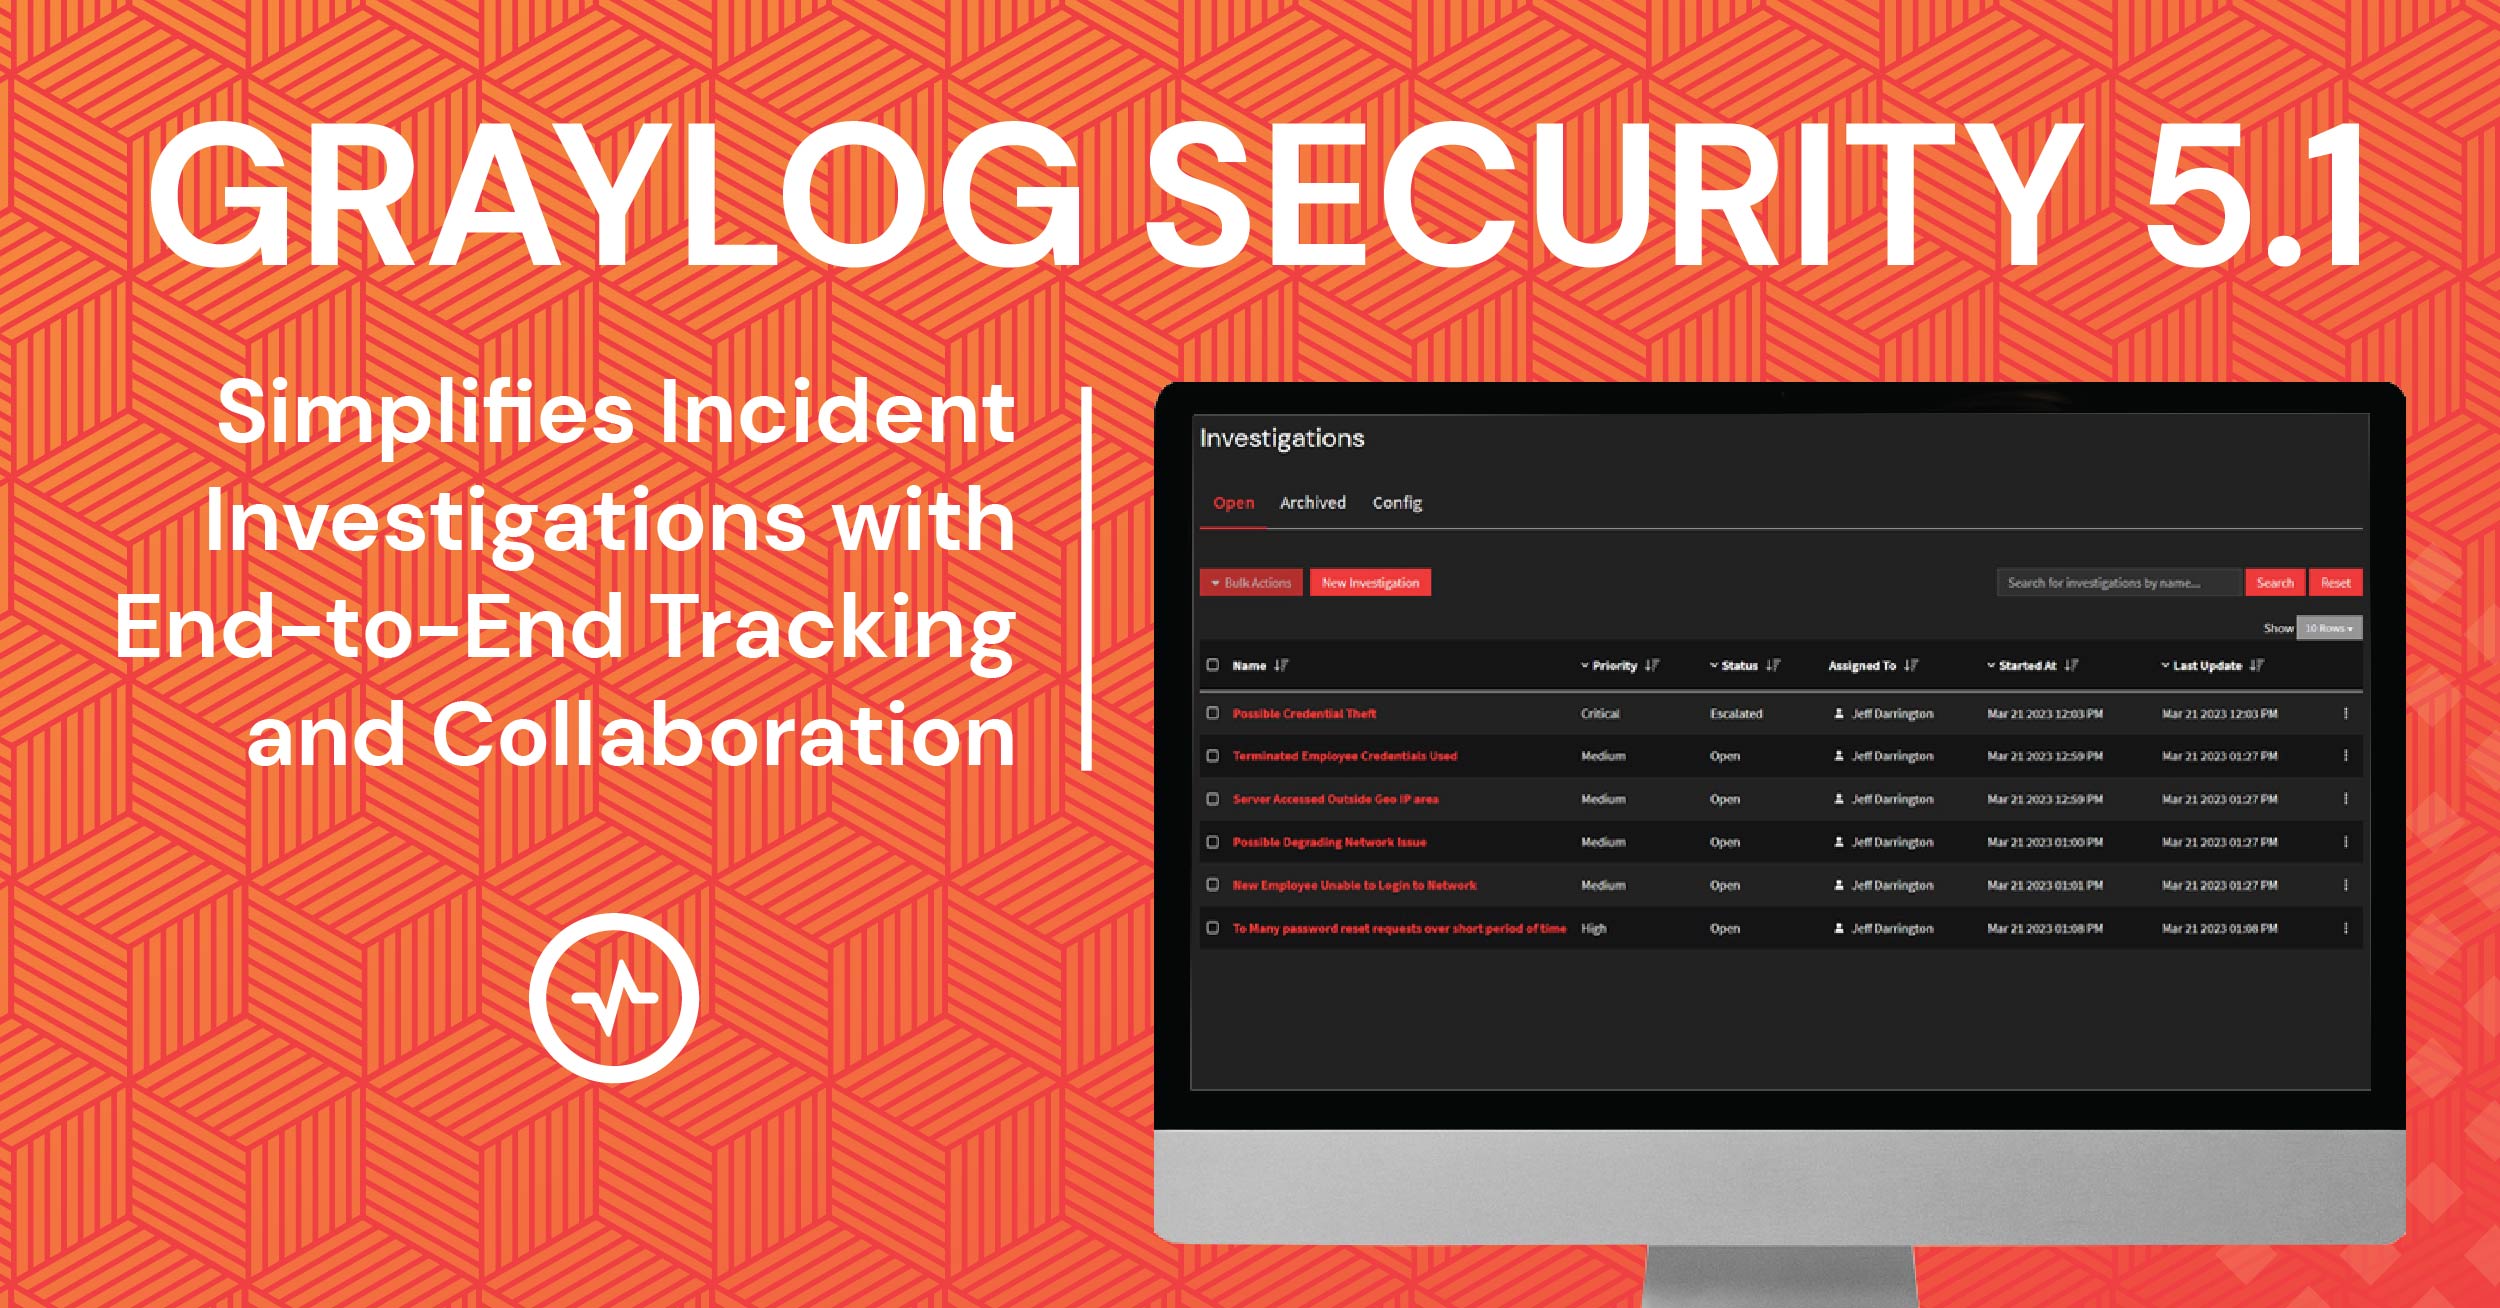 Graylog Security 5.1 Incident Investigations